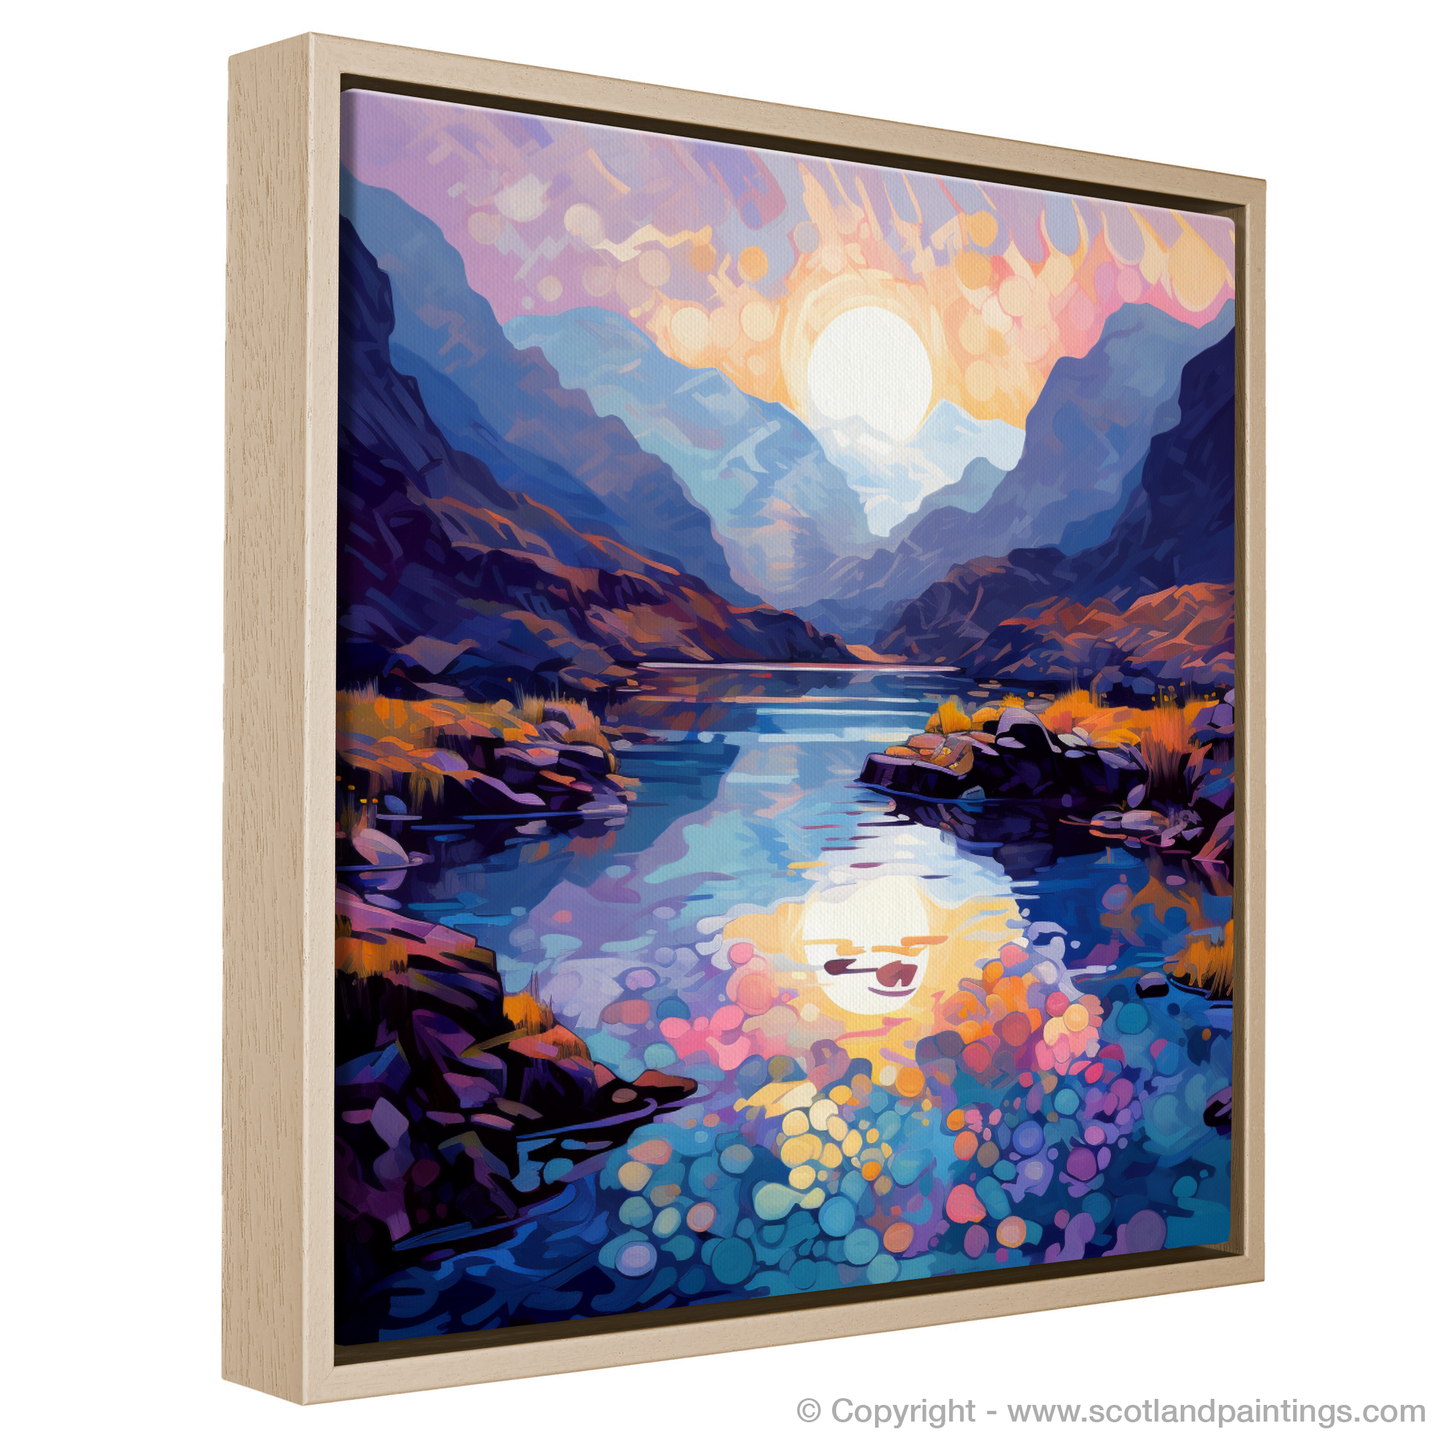 Painting and Art Print of Isle of Skye Fairy Pools at dusk in summer entitled "Dusk at the Fairy Pools: An Impressionist Ode to Highland Summer".